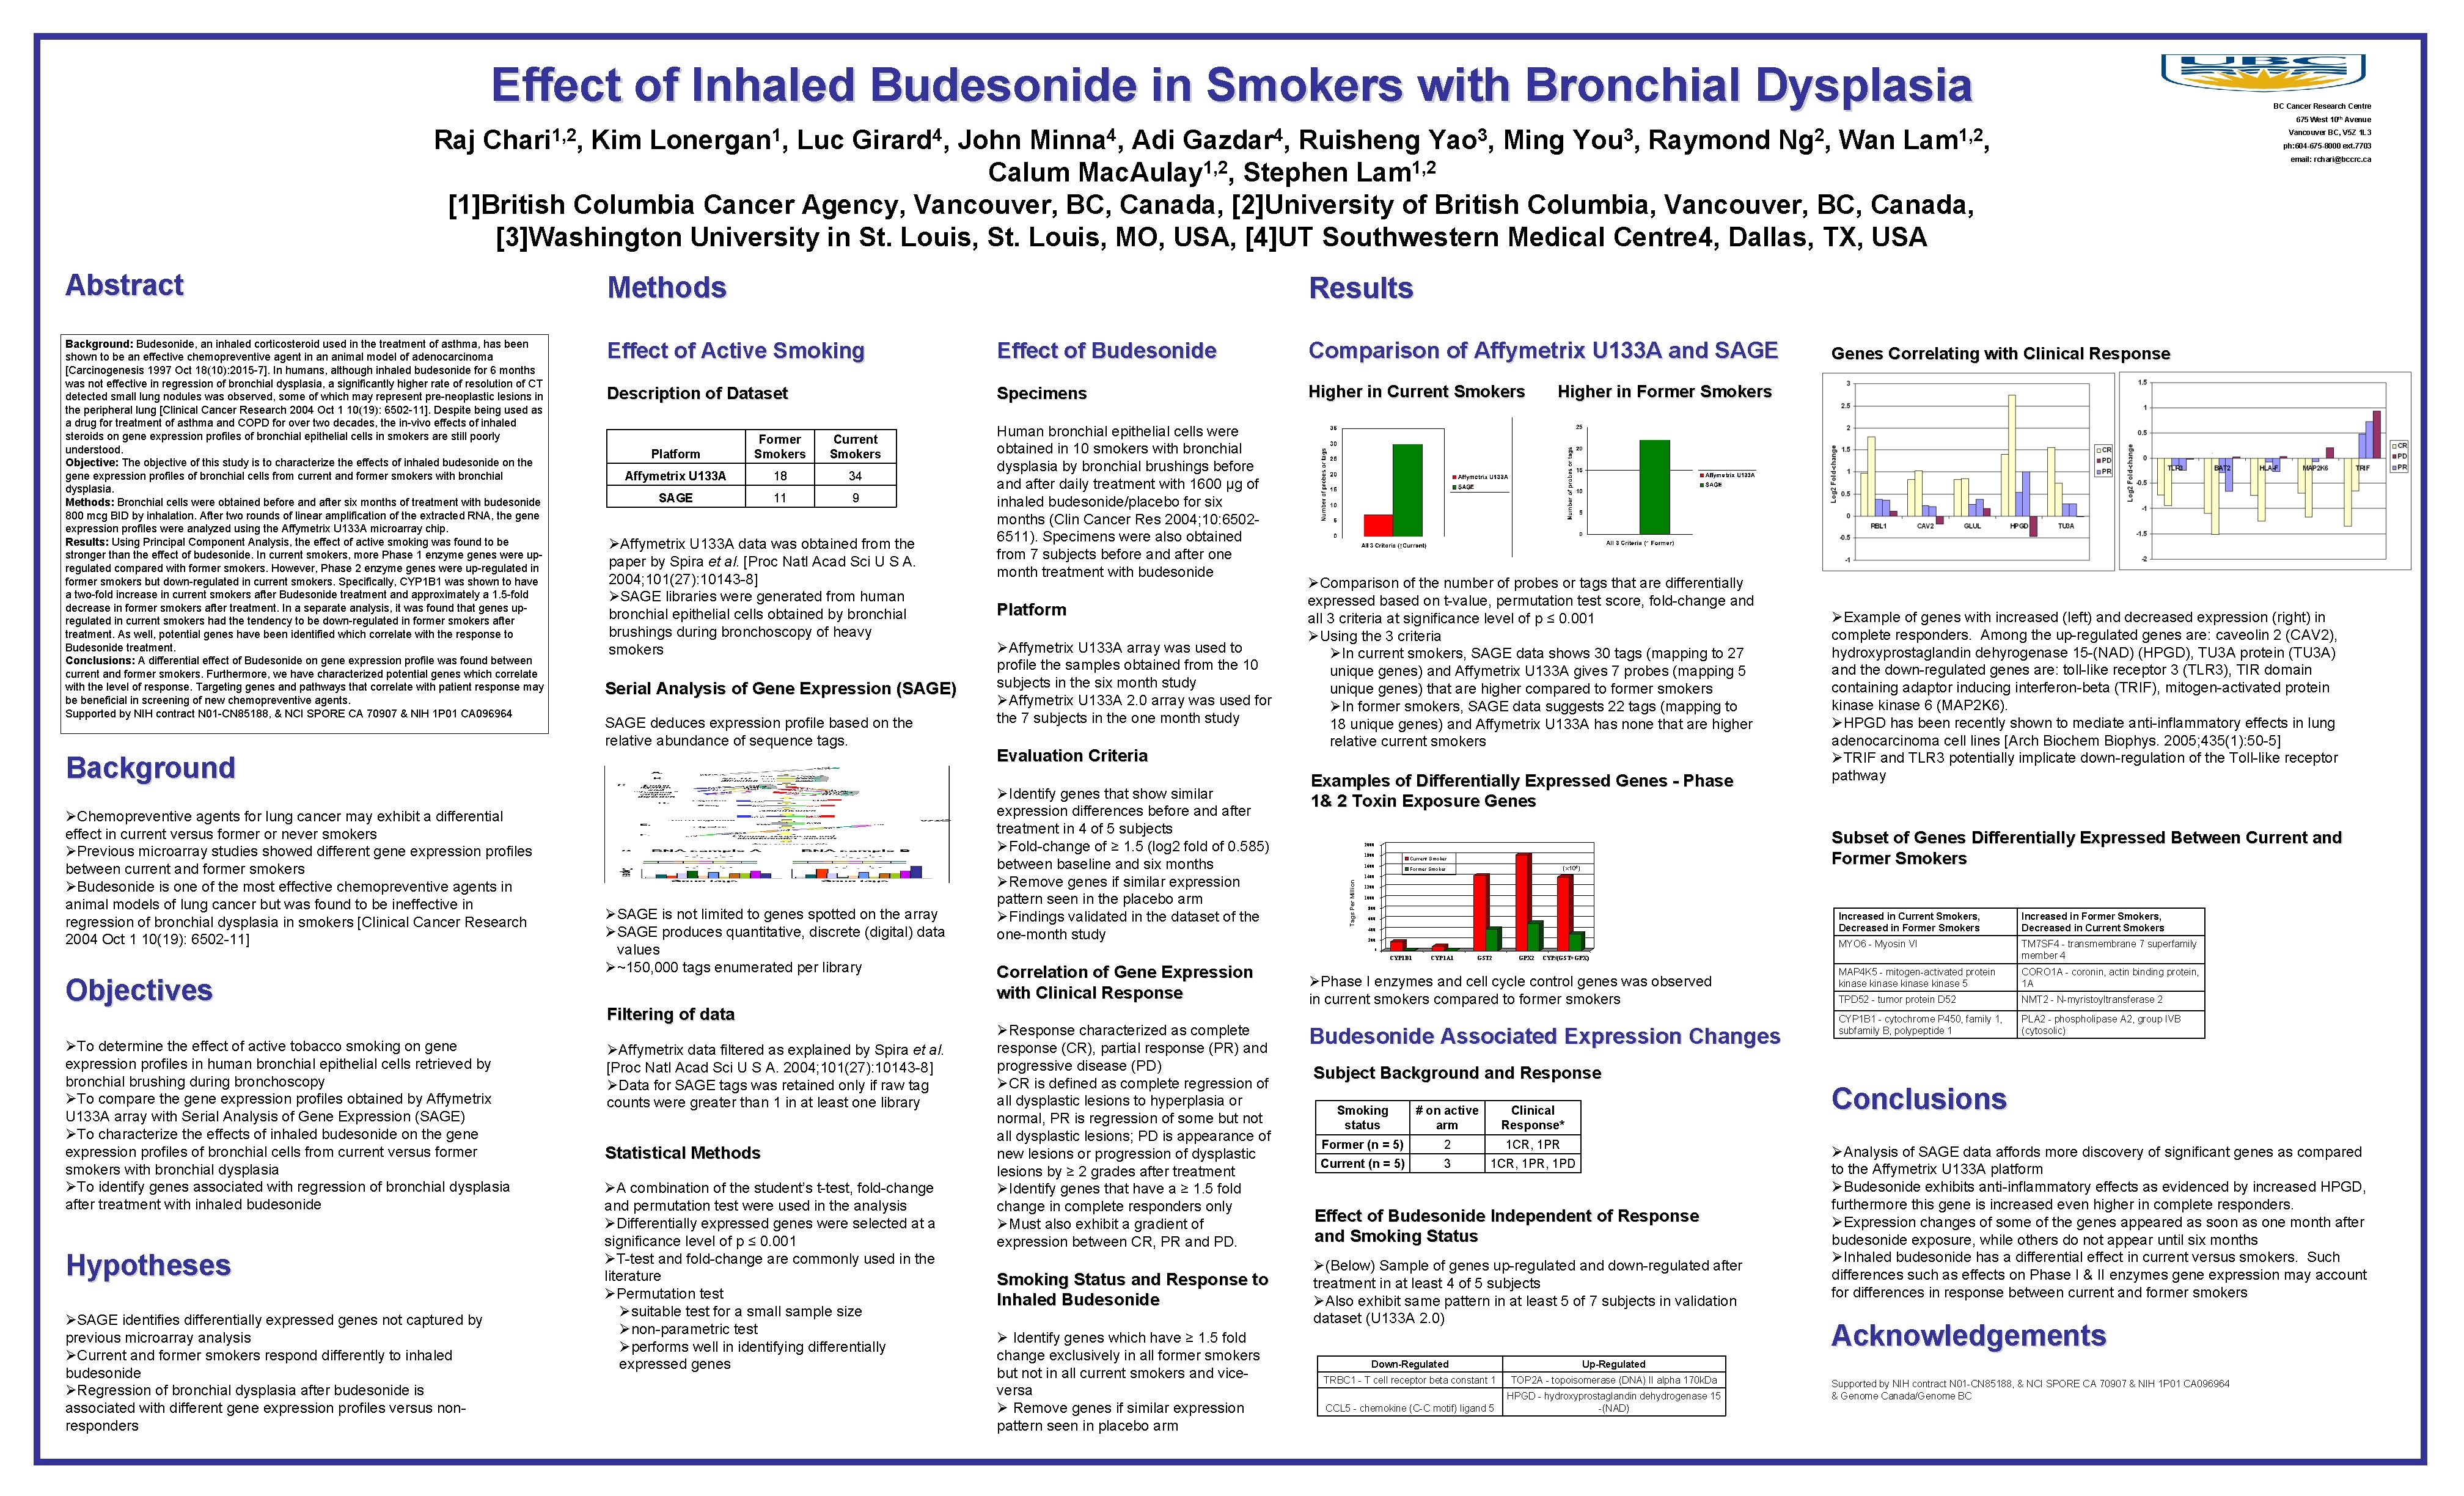 Effect of Inhaled Budesonide in Smokers with Bronchial Dysplasia BC Cancer Research Centre 675